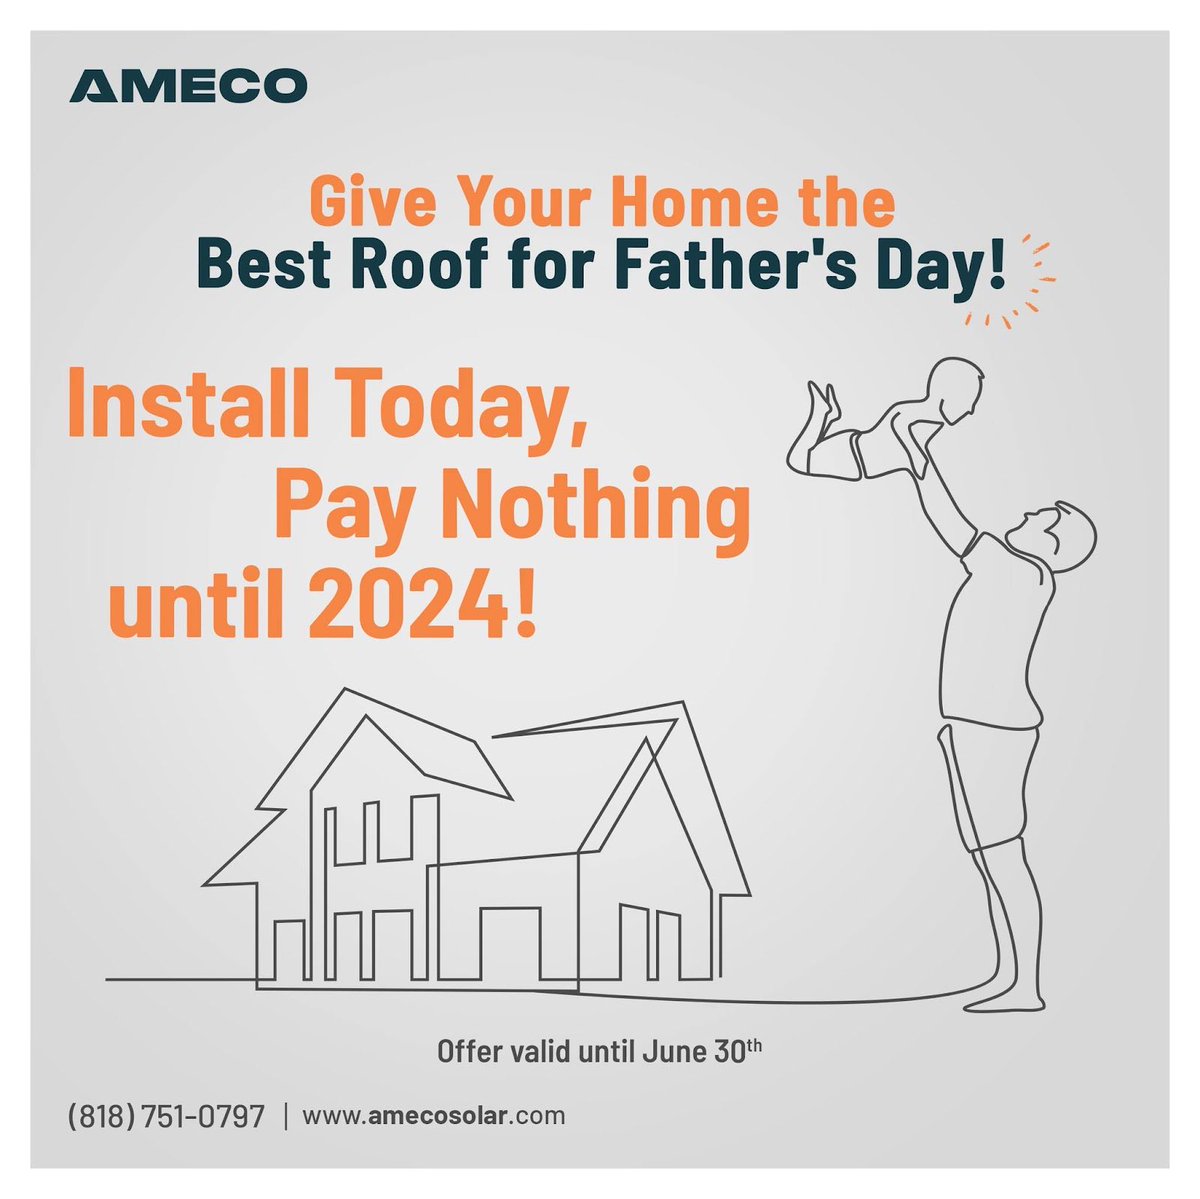 Unlock an Unbeatable Father's Day Offer NOW!
Get Your Roof Installed Today, Pay Nothing Until 2024!
#amecosolar #roofingservices